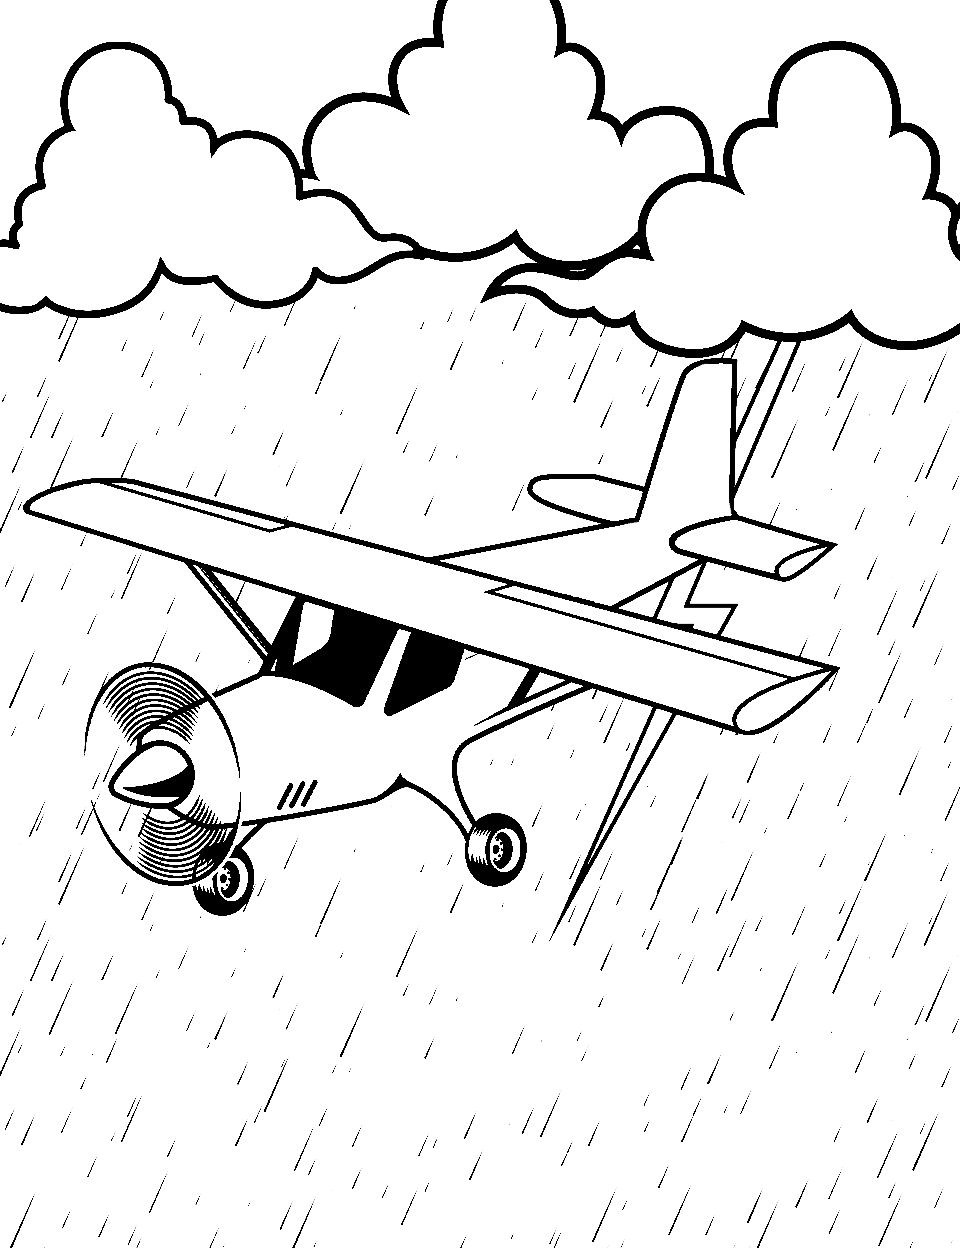 Airplane in a Storm Coloring Page - An airplane flying through a storm in the background.